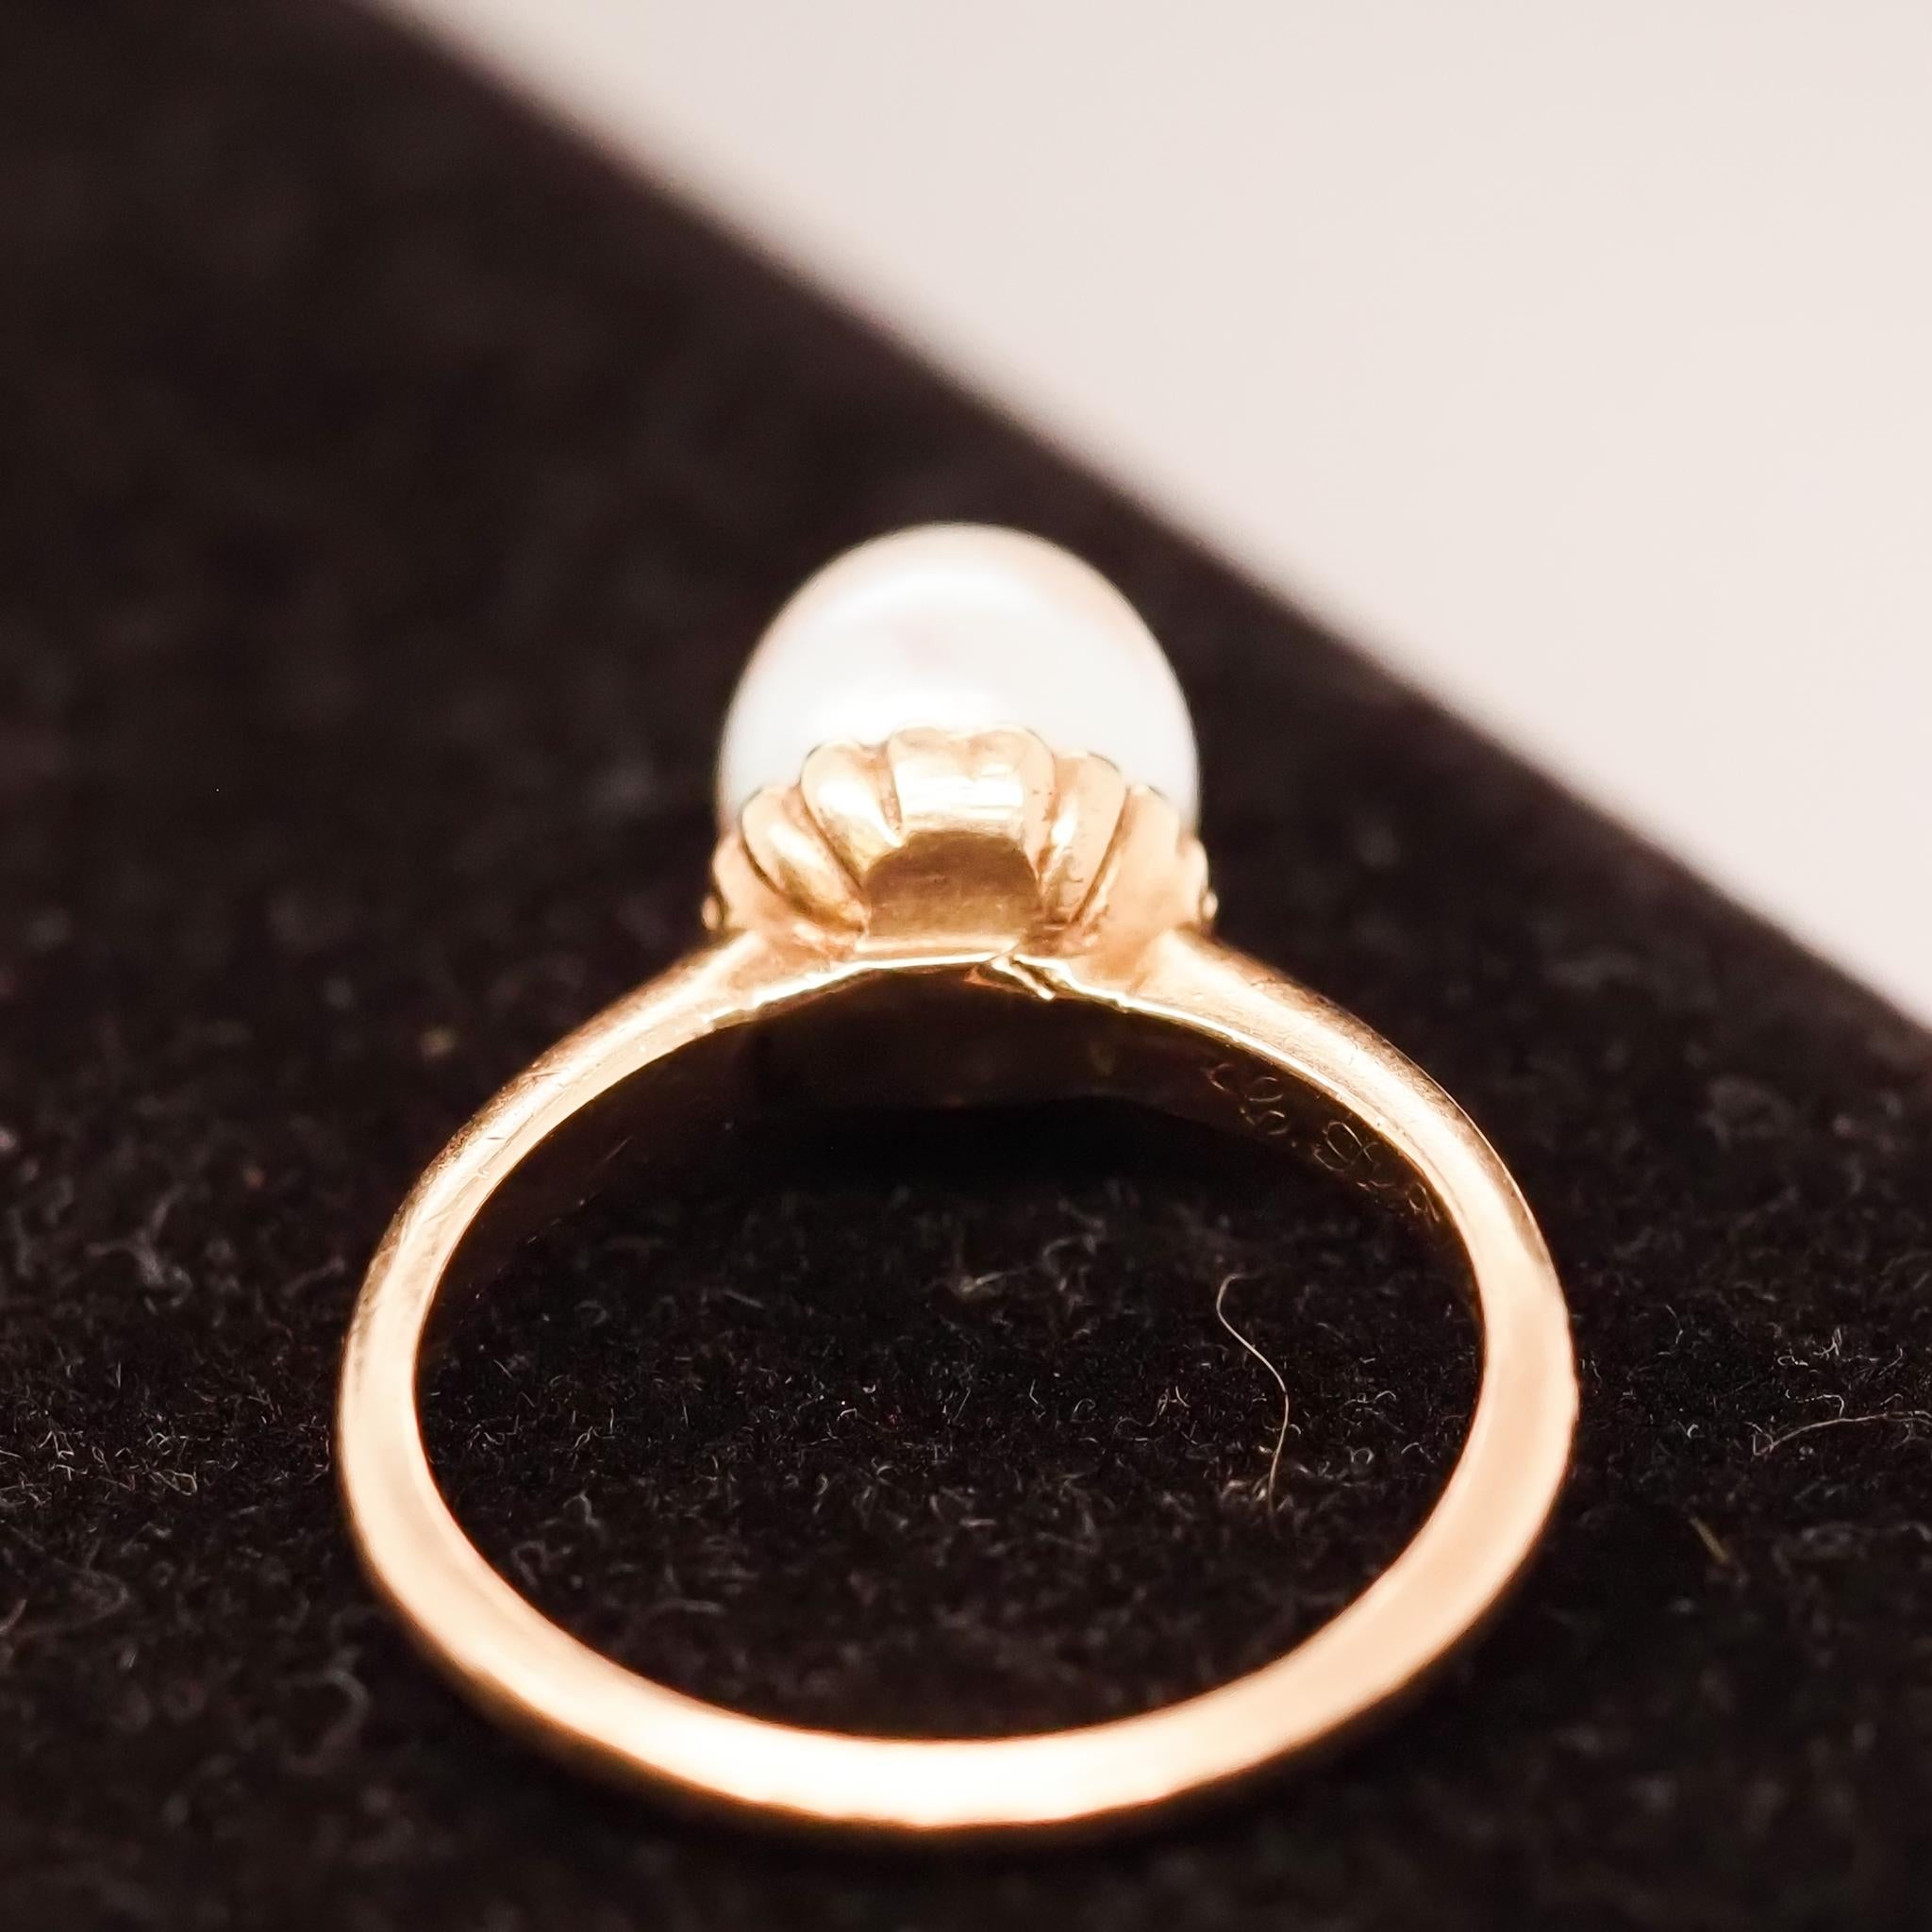 Year: 1900s

Item Details:
Ring Size: 6.25
Metal Type: 14K Yellow Gold [Hallmarked, and Tested]
Weight: 3.2 grams

Pearl Details: 8.19mm, Pinkish Luster, Oval shape

Band Width: 1.80 mm
Condition: Excellent

Price: 850

‌

This ring can be sized up